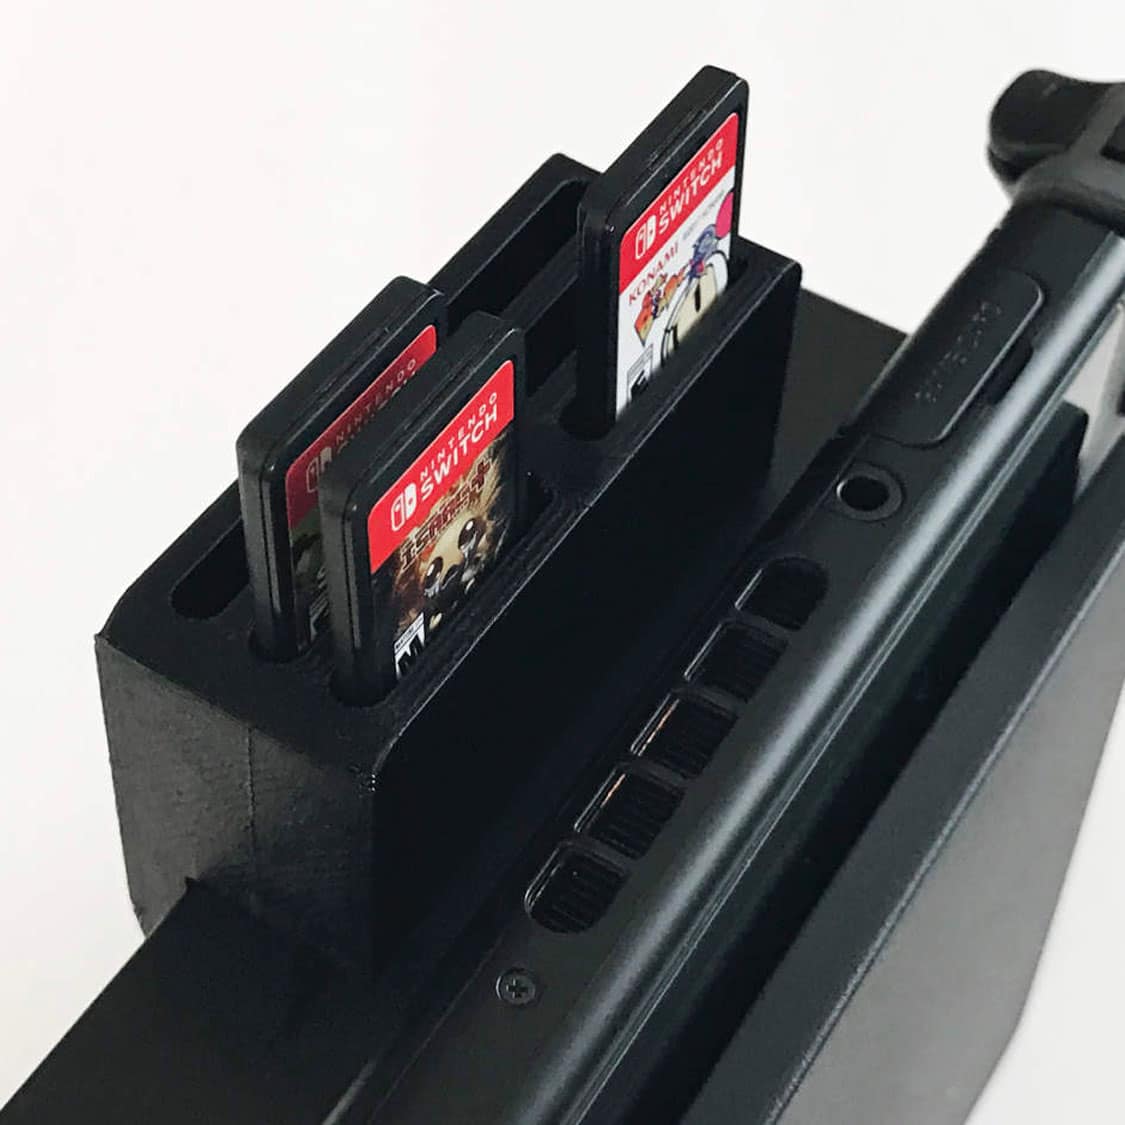 nintendo switch cartridge with multiple games